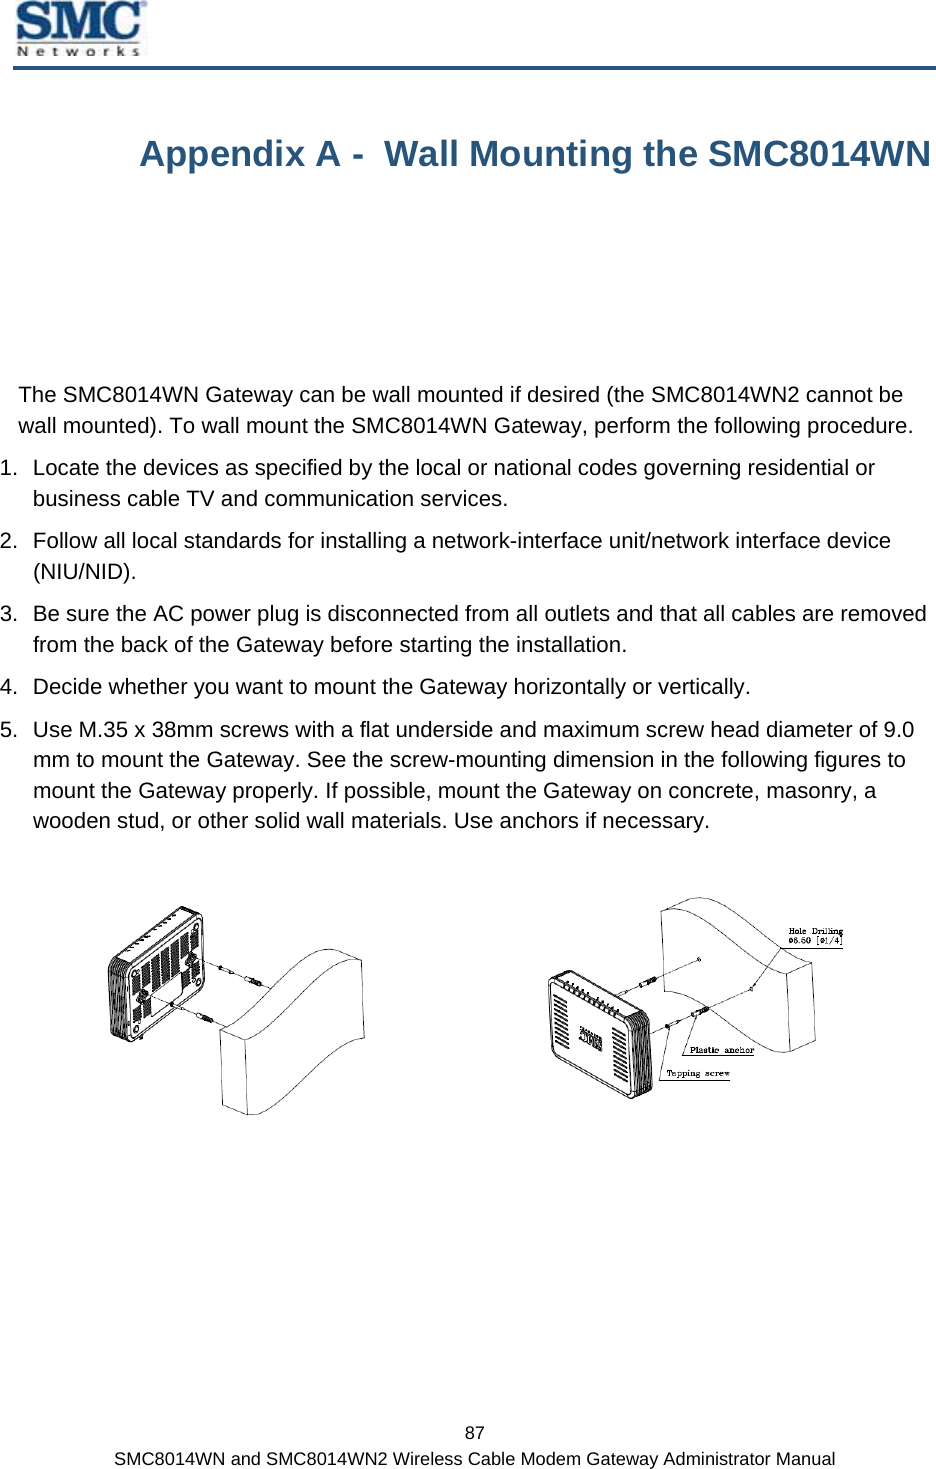  87 SMC8014WN and SMC8014WN2 Wireless Cable Modem Gateway Administrator Manual Appendix A -  Wall Mounting the SMC8014WN The SMC8014WN Gateway can be wall mounted if desired (the SMC8014WN2 cannot be wall mounted). To wall mount the SMC8014WN Gateway, perform the following procedure.  1.  Locate the devices as specified by the local or national codes governing residential or business cable TV and communication services.  2.  Follow all local standards for installing a network-interface unit/network interface device (NIU/NID). 3.  Be sure the AC power plug is disconnected from all outlets and that all cables are removed from the back of the Gateway before starting the installation. 4.  Decide whether you want to mount the Gateway horizontally or vertically. 5.  Use M.35 x 38mm screws with a flat underside and maximum screw head diameter of 9.0 mm to mount the Gateway. See the screw-mounting dimension in the following figures to mount the Gateway properly. If possible, mount the Gateway on concrete, masonry, a wooden stud, or other solid wall materials. Use anchors if necessary.     